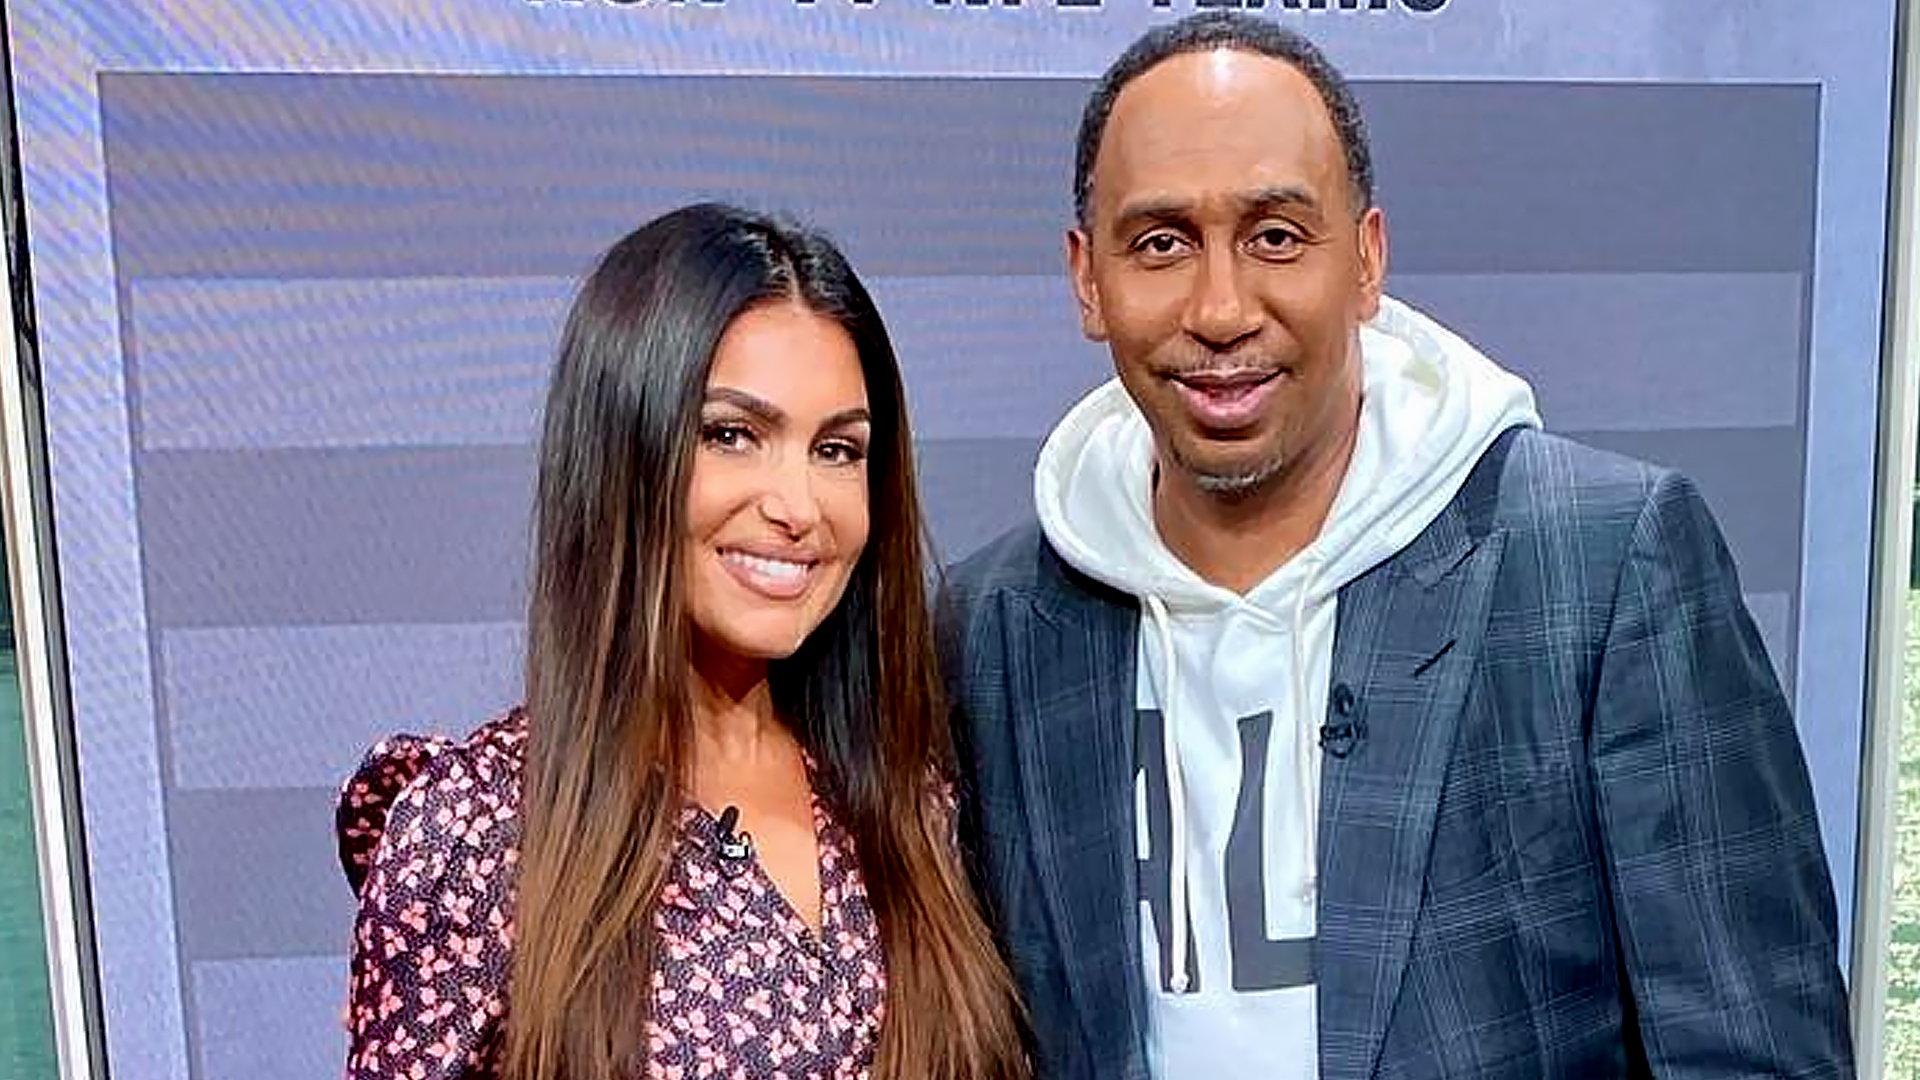 Stephen A. Smith Addresses Rumors of Romance with Co-host Molly Querim